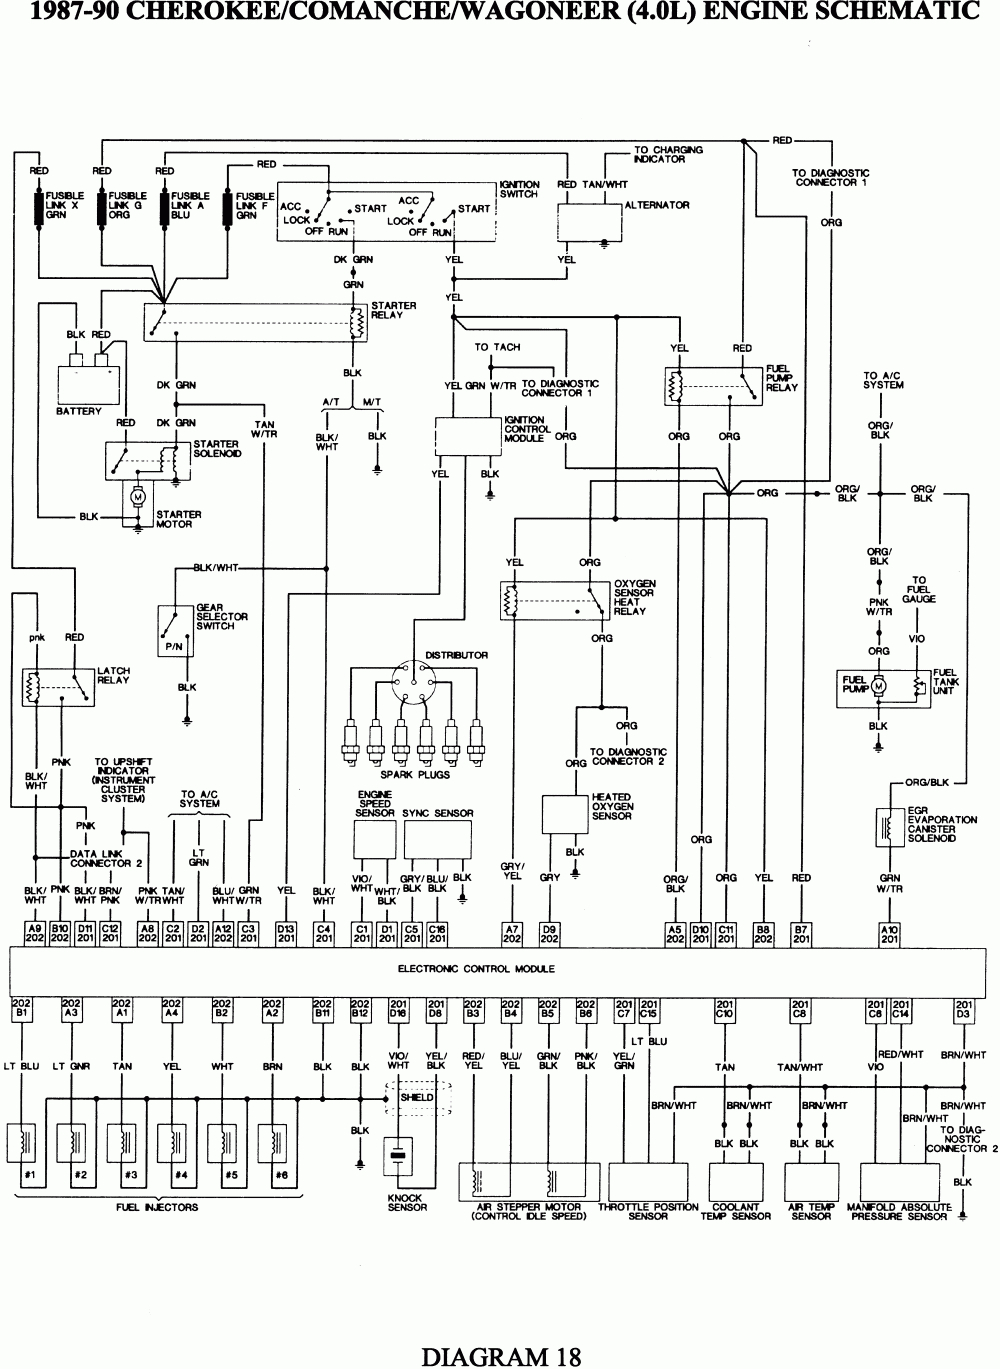 1997 Jeep Cherokee Wiring Schematic - Wiring Diagrams Hubs - 2000 Jeep Cherokee Wiring Diagram